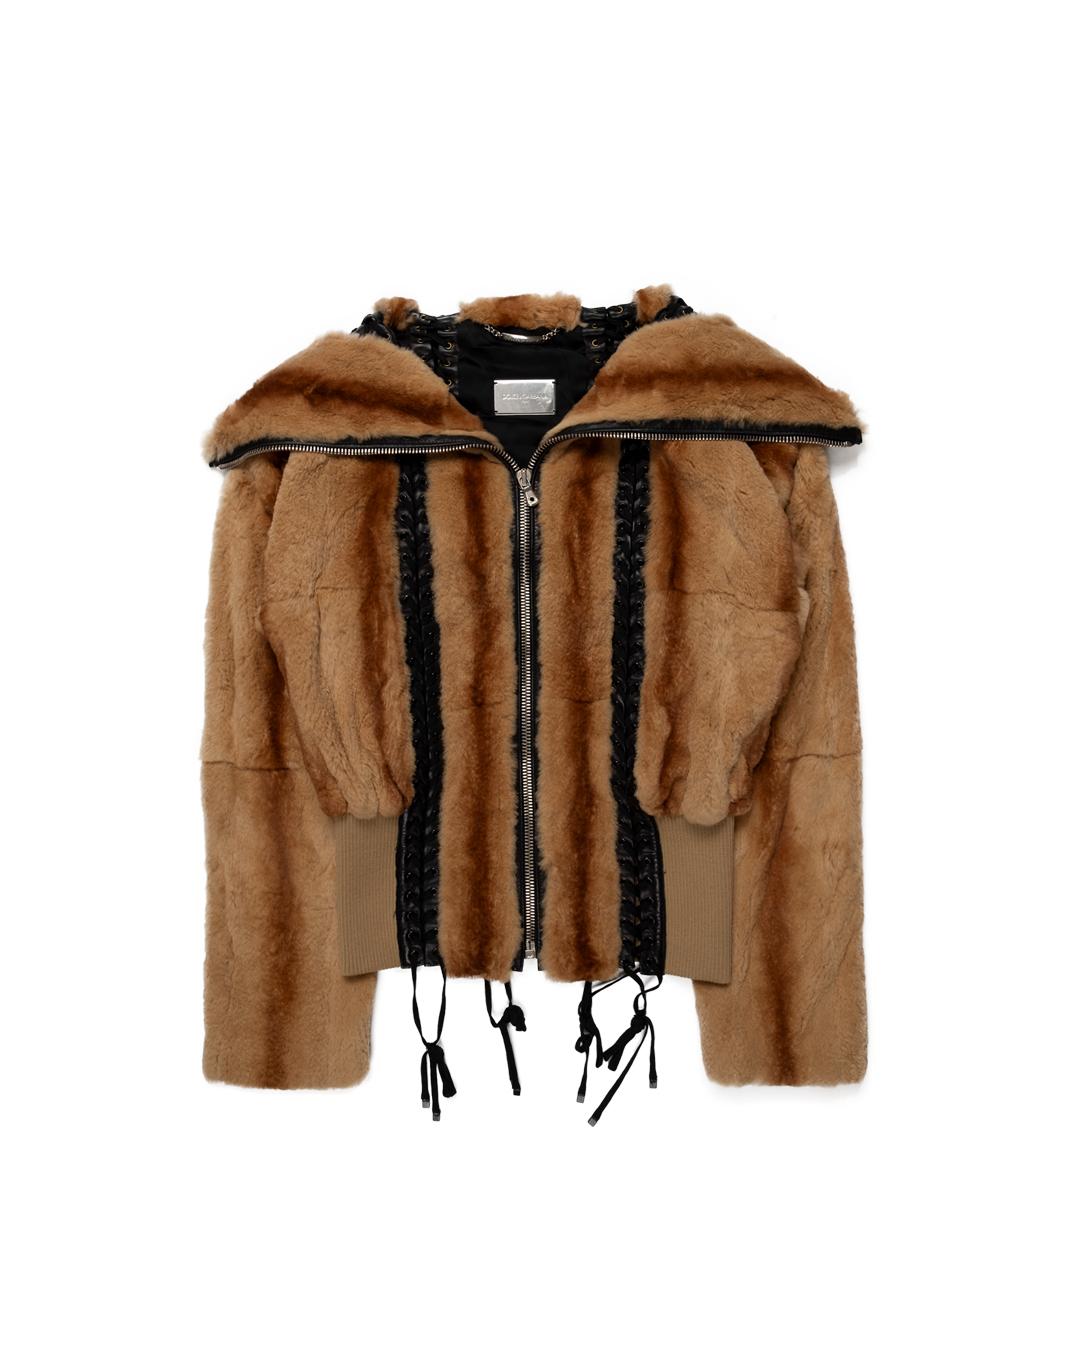 Dolce & Gabbana SS2003 Weasel Fur Aviator Jacket In Excellent Condition For Sale In Beverly Hills, CA